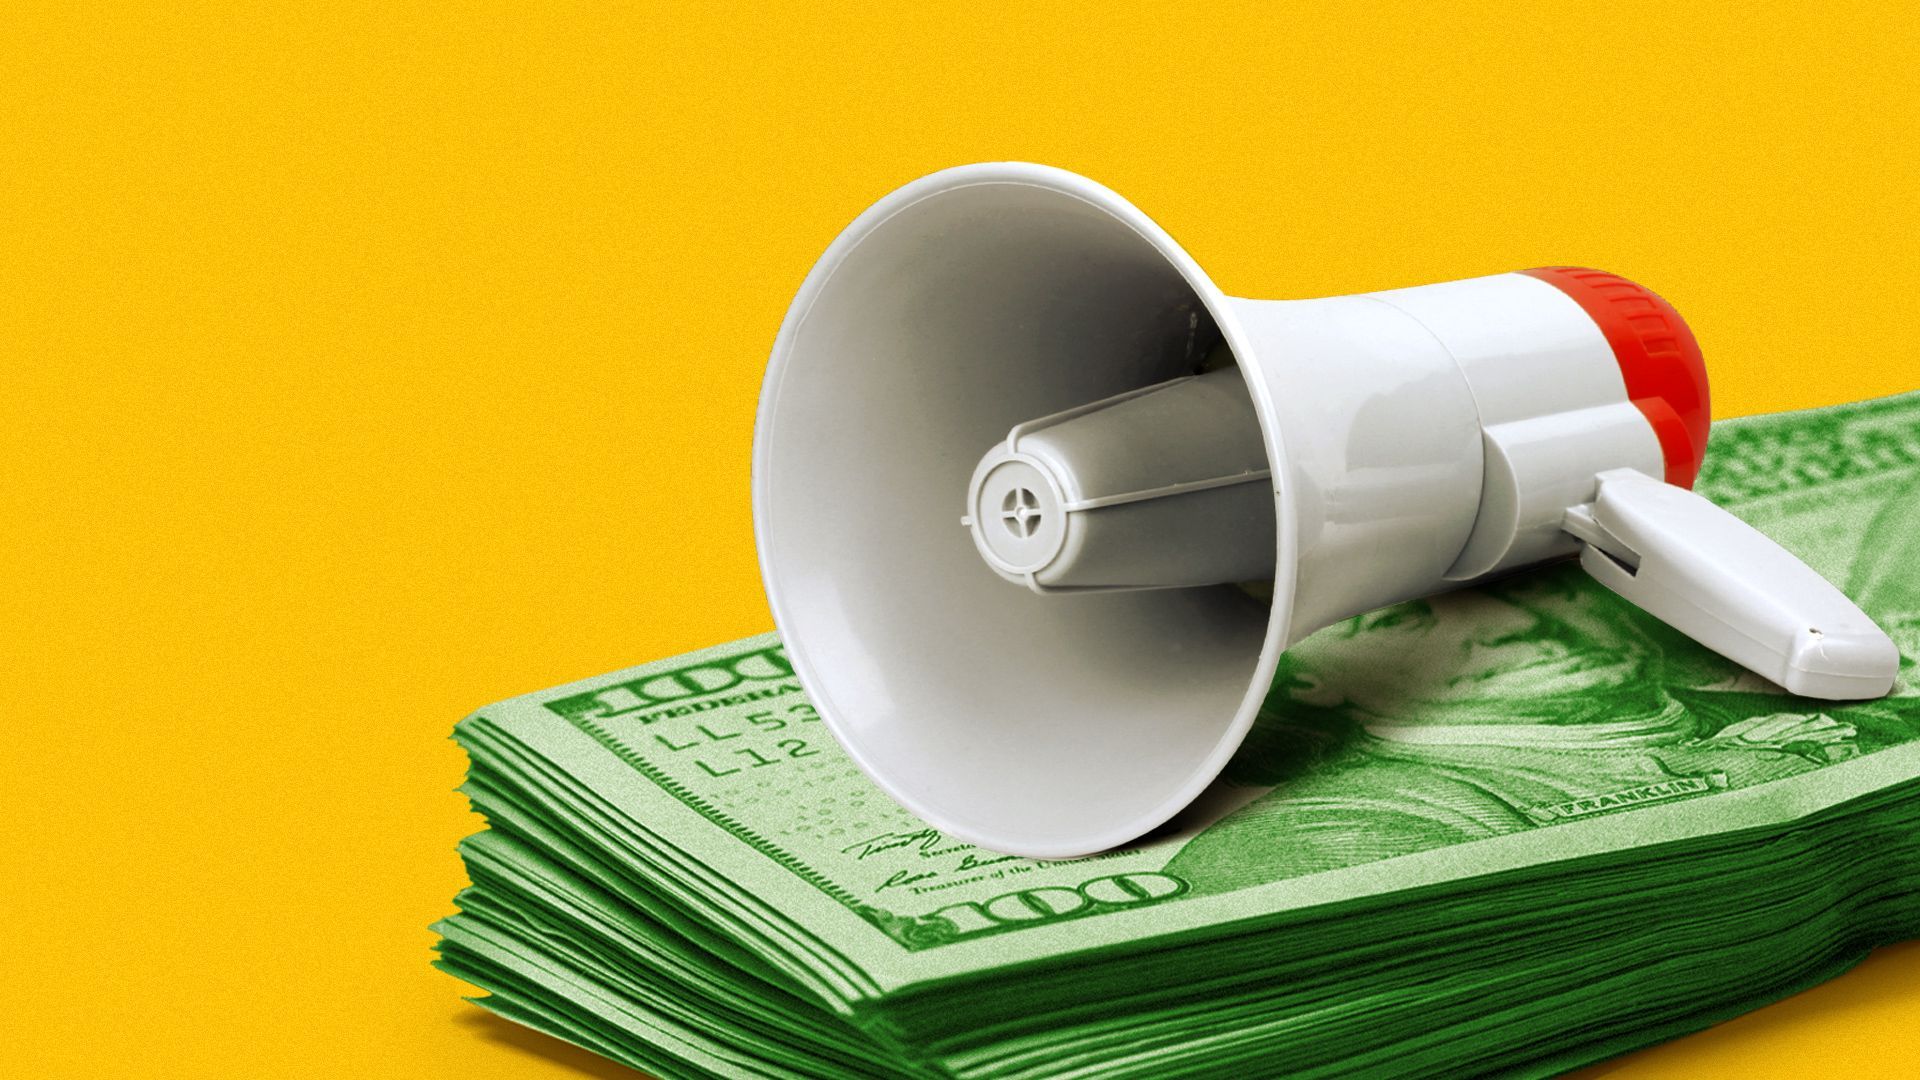 Illustration of a bullhorn resting on top of a stack of one hundred dollar bills.